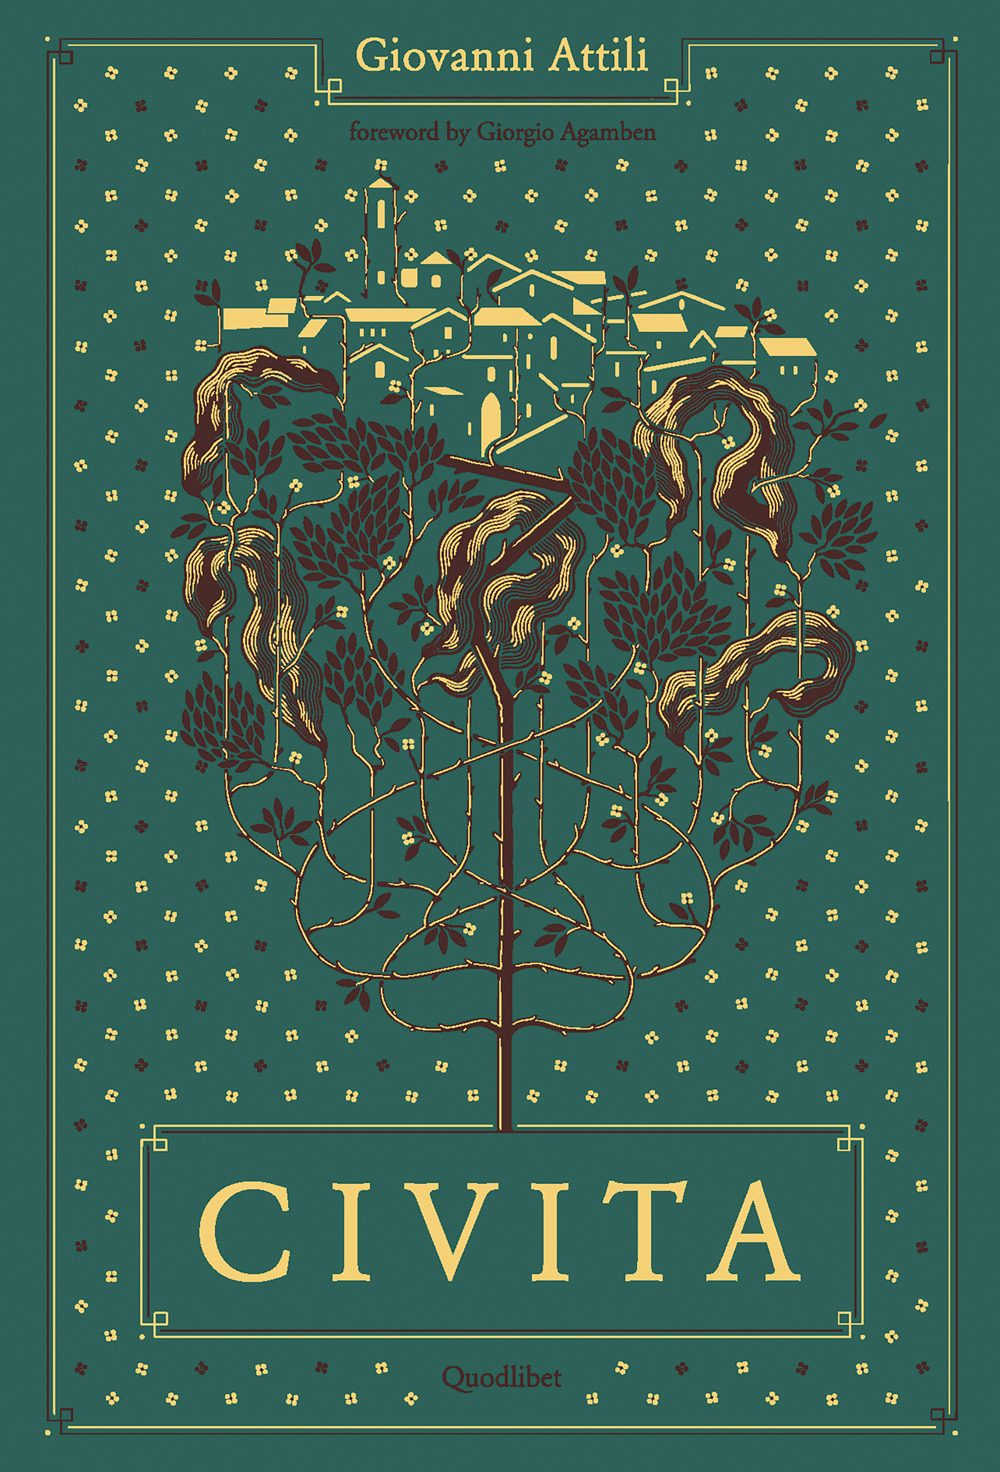 Civita. Without adjectives or other specifications